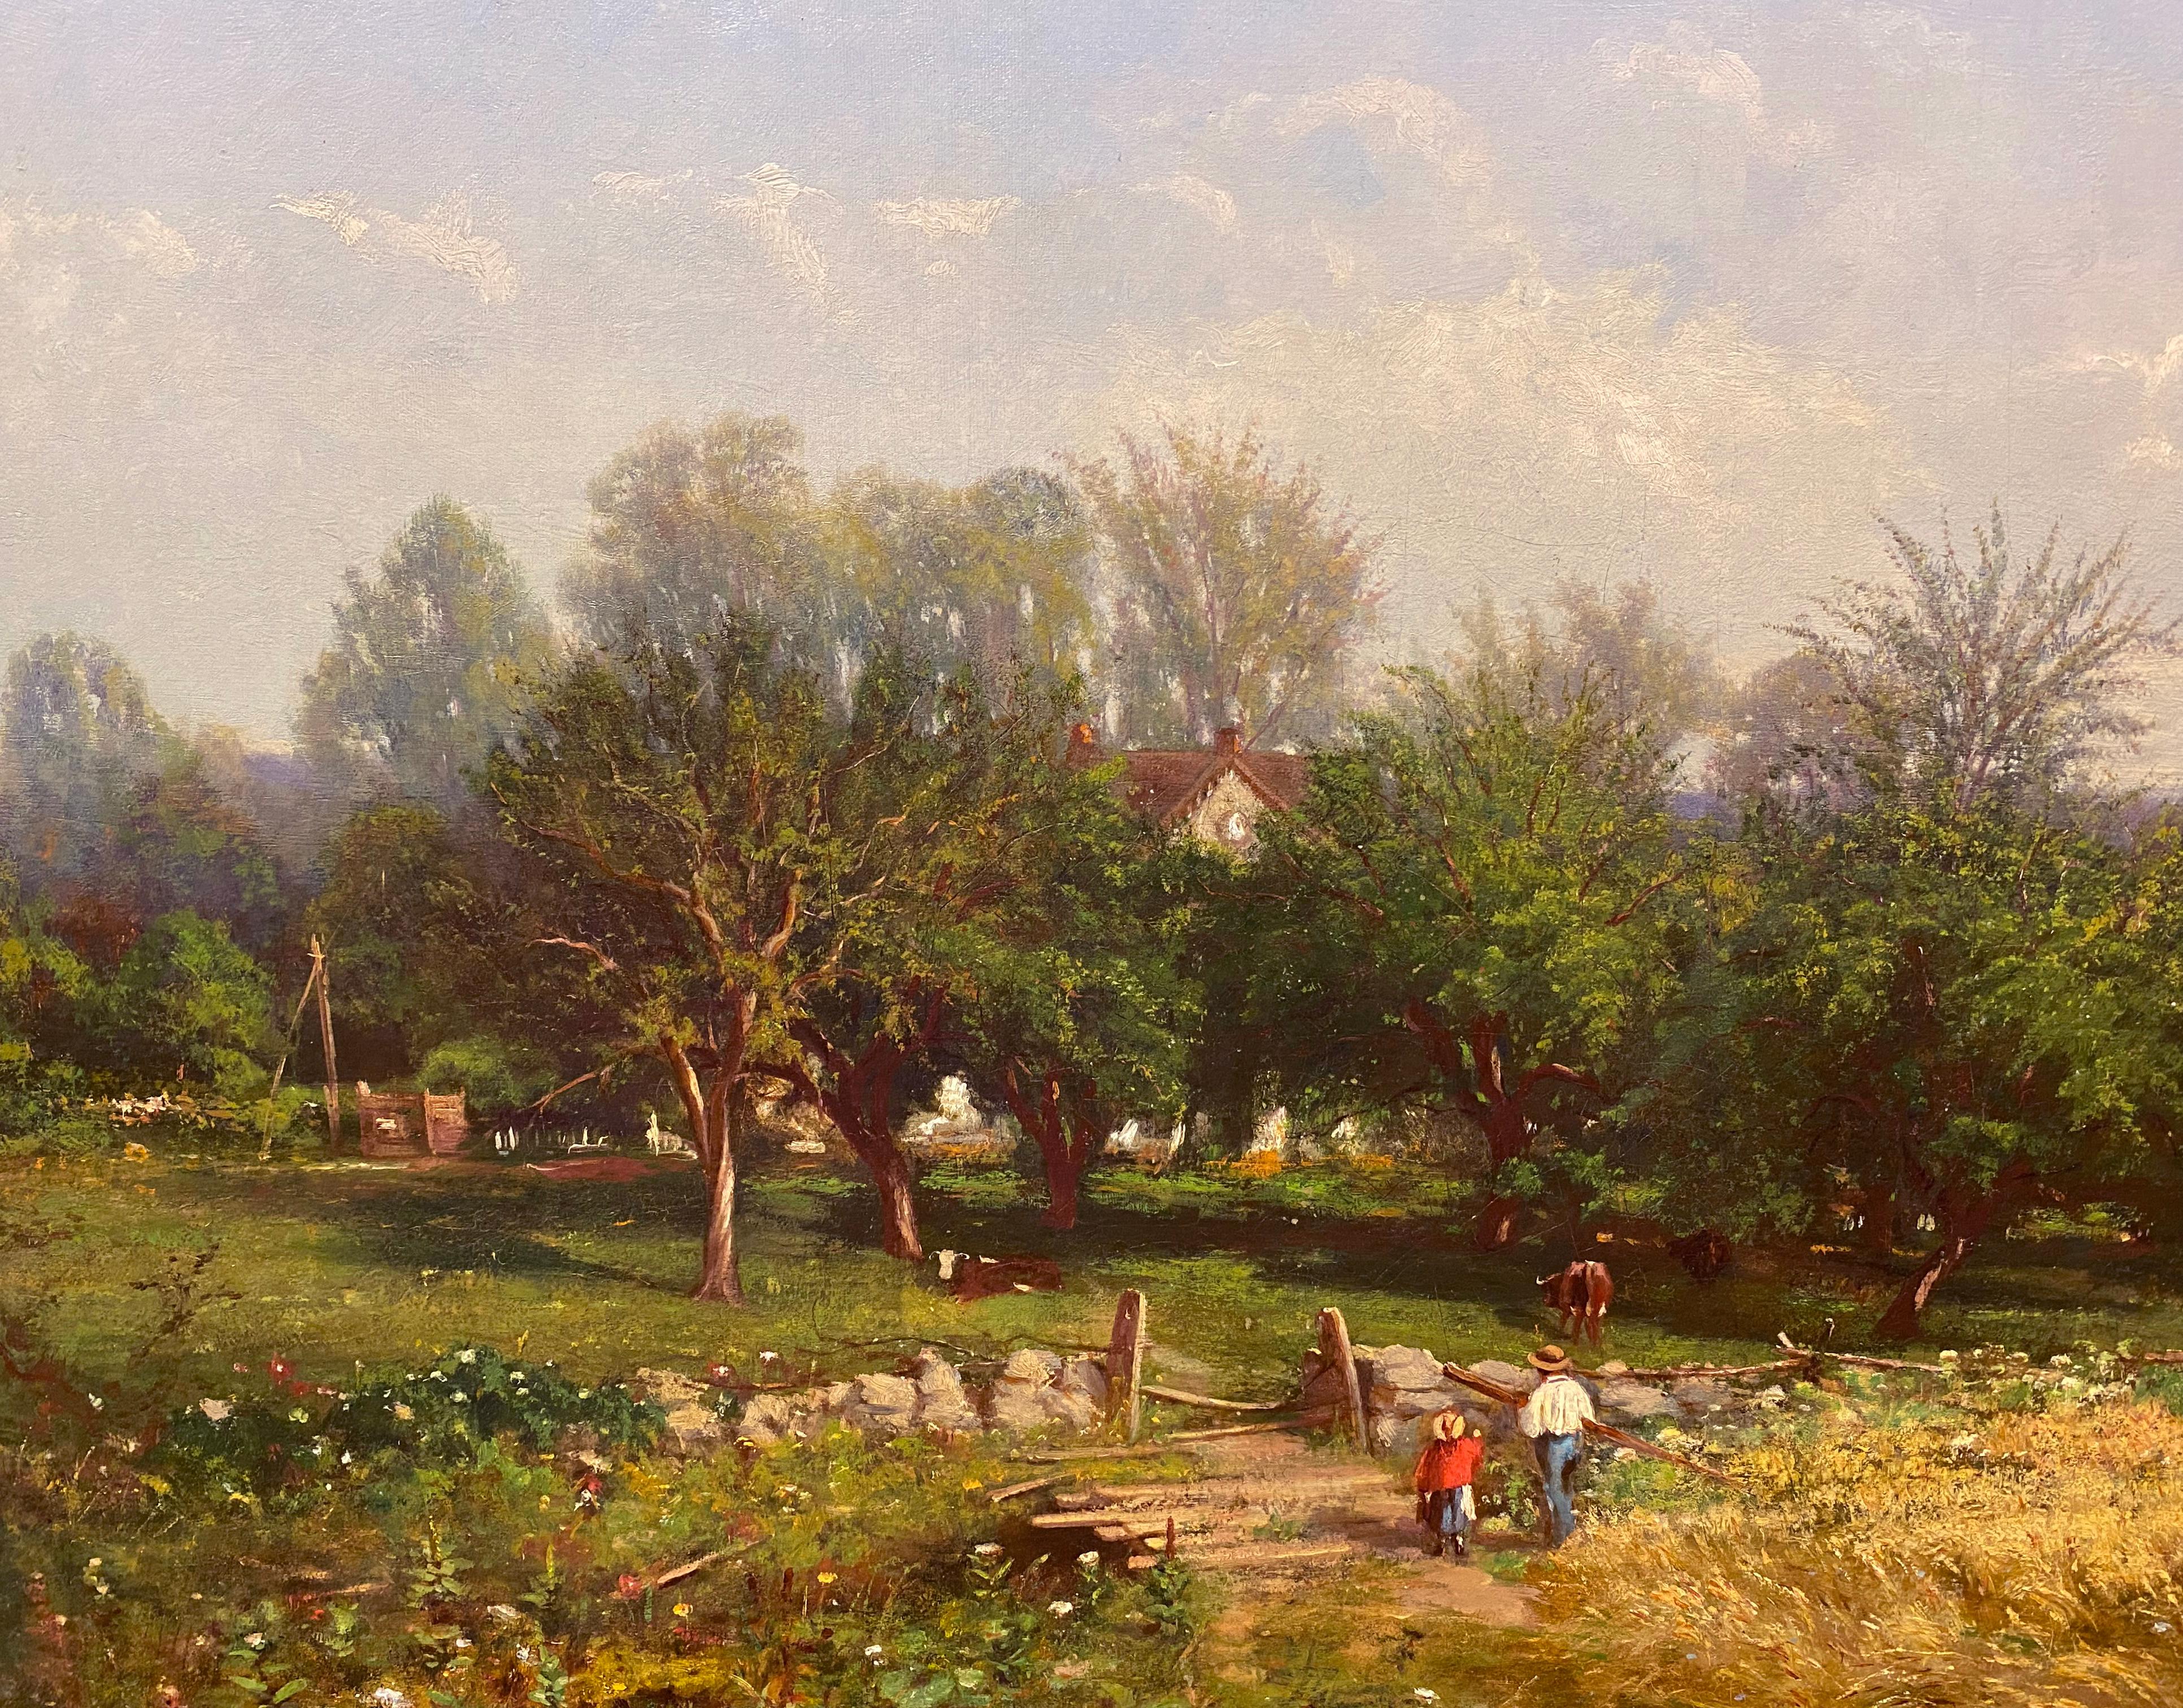 A fine pastoral landscape by Irish artist Edward B. Gay (1837-1928). Gay was born in Dublin, Ireland, and emigrated with his to Albany, NY at a very young age as a result of the potato famine. He began his art studies with a local Hudson River